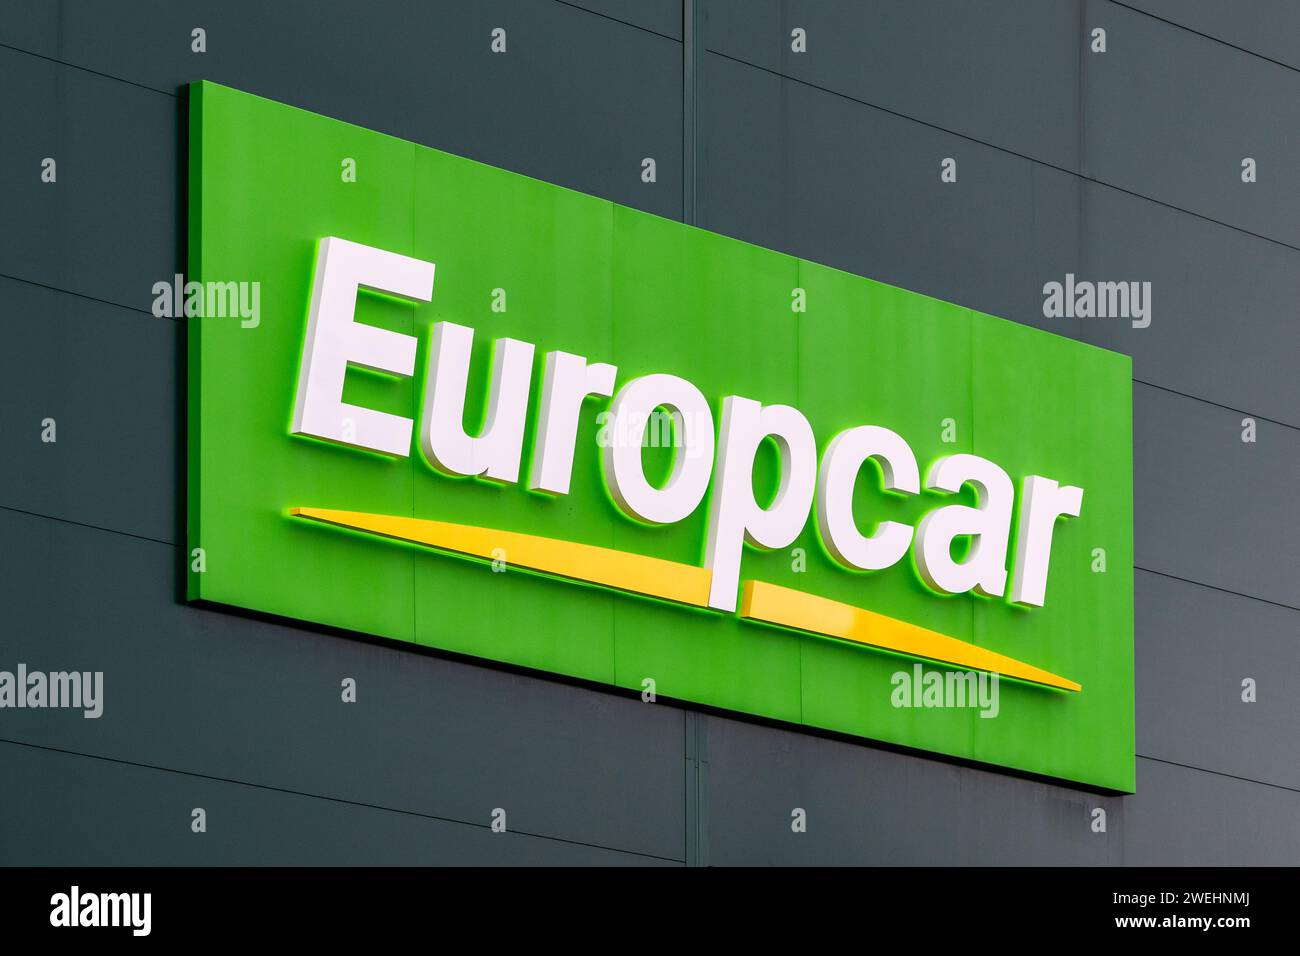 Europcar hire car company logo in Leicester, UK. Stock Photo